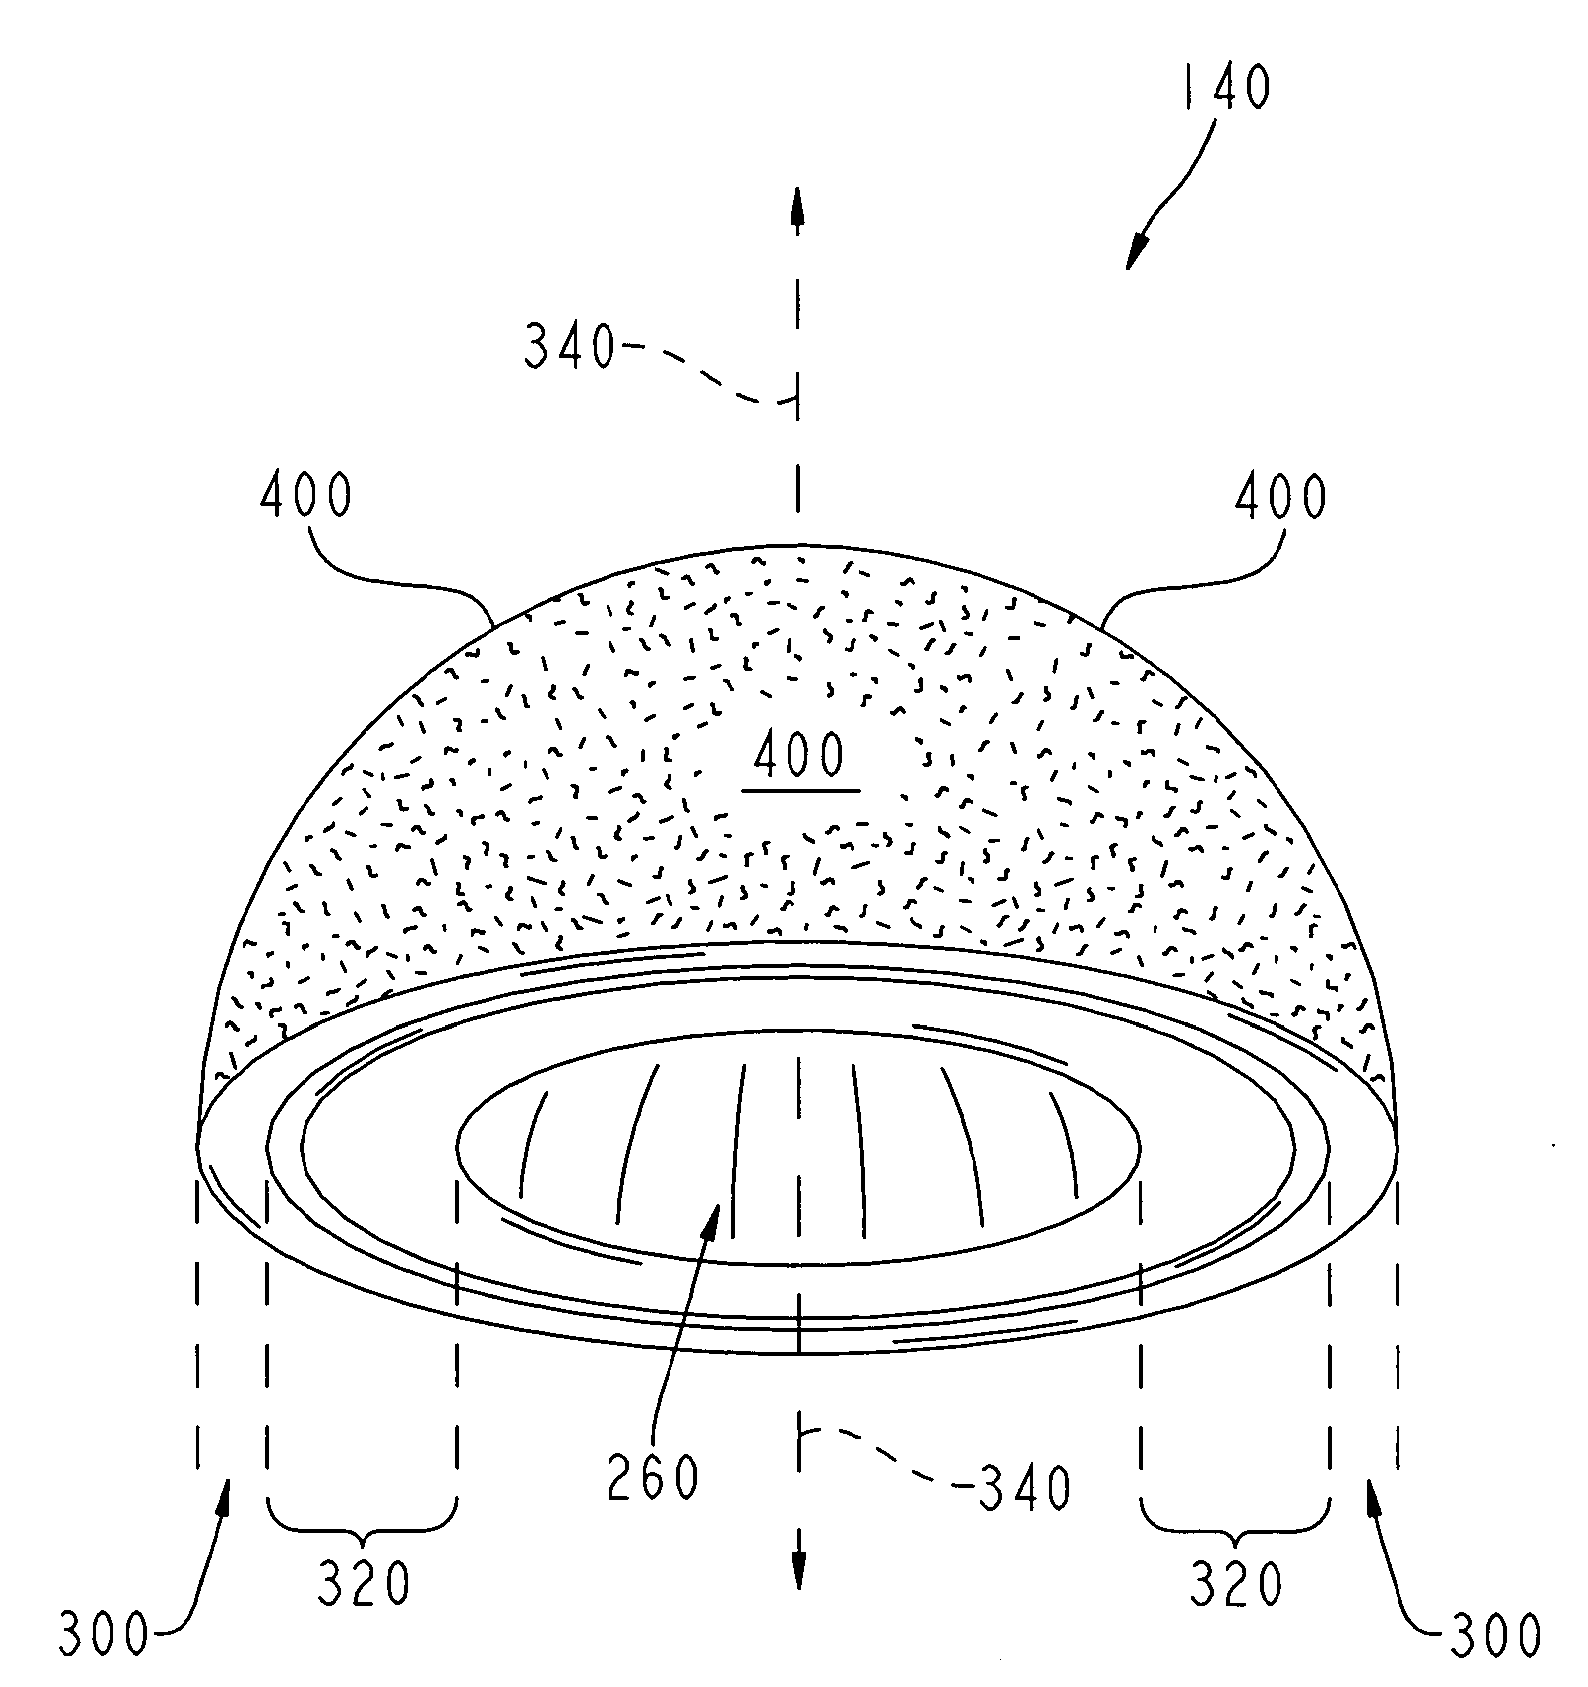 Method for making a metal-backed acetabular implant